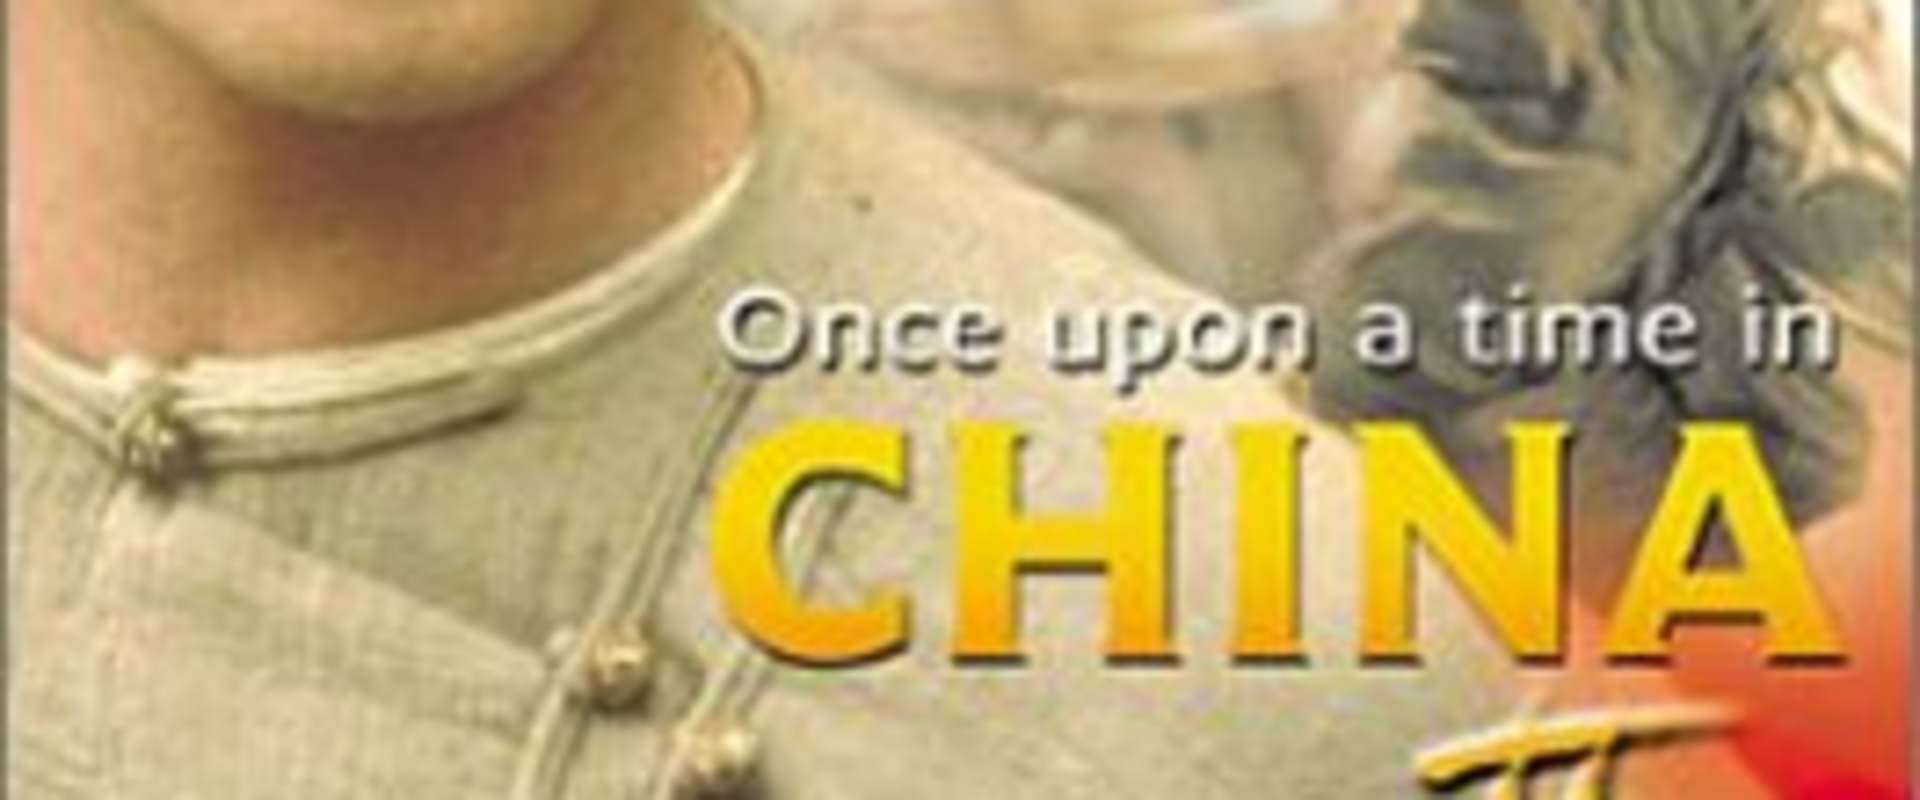 Once Upon a Time in China II background 2